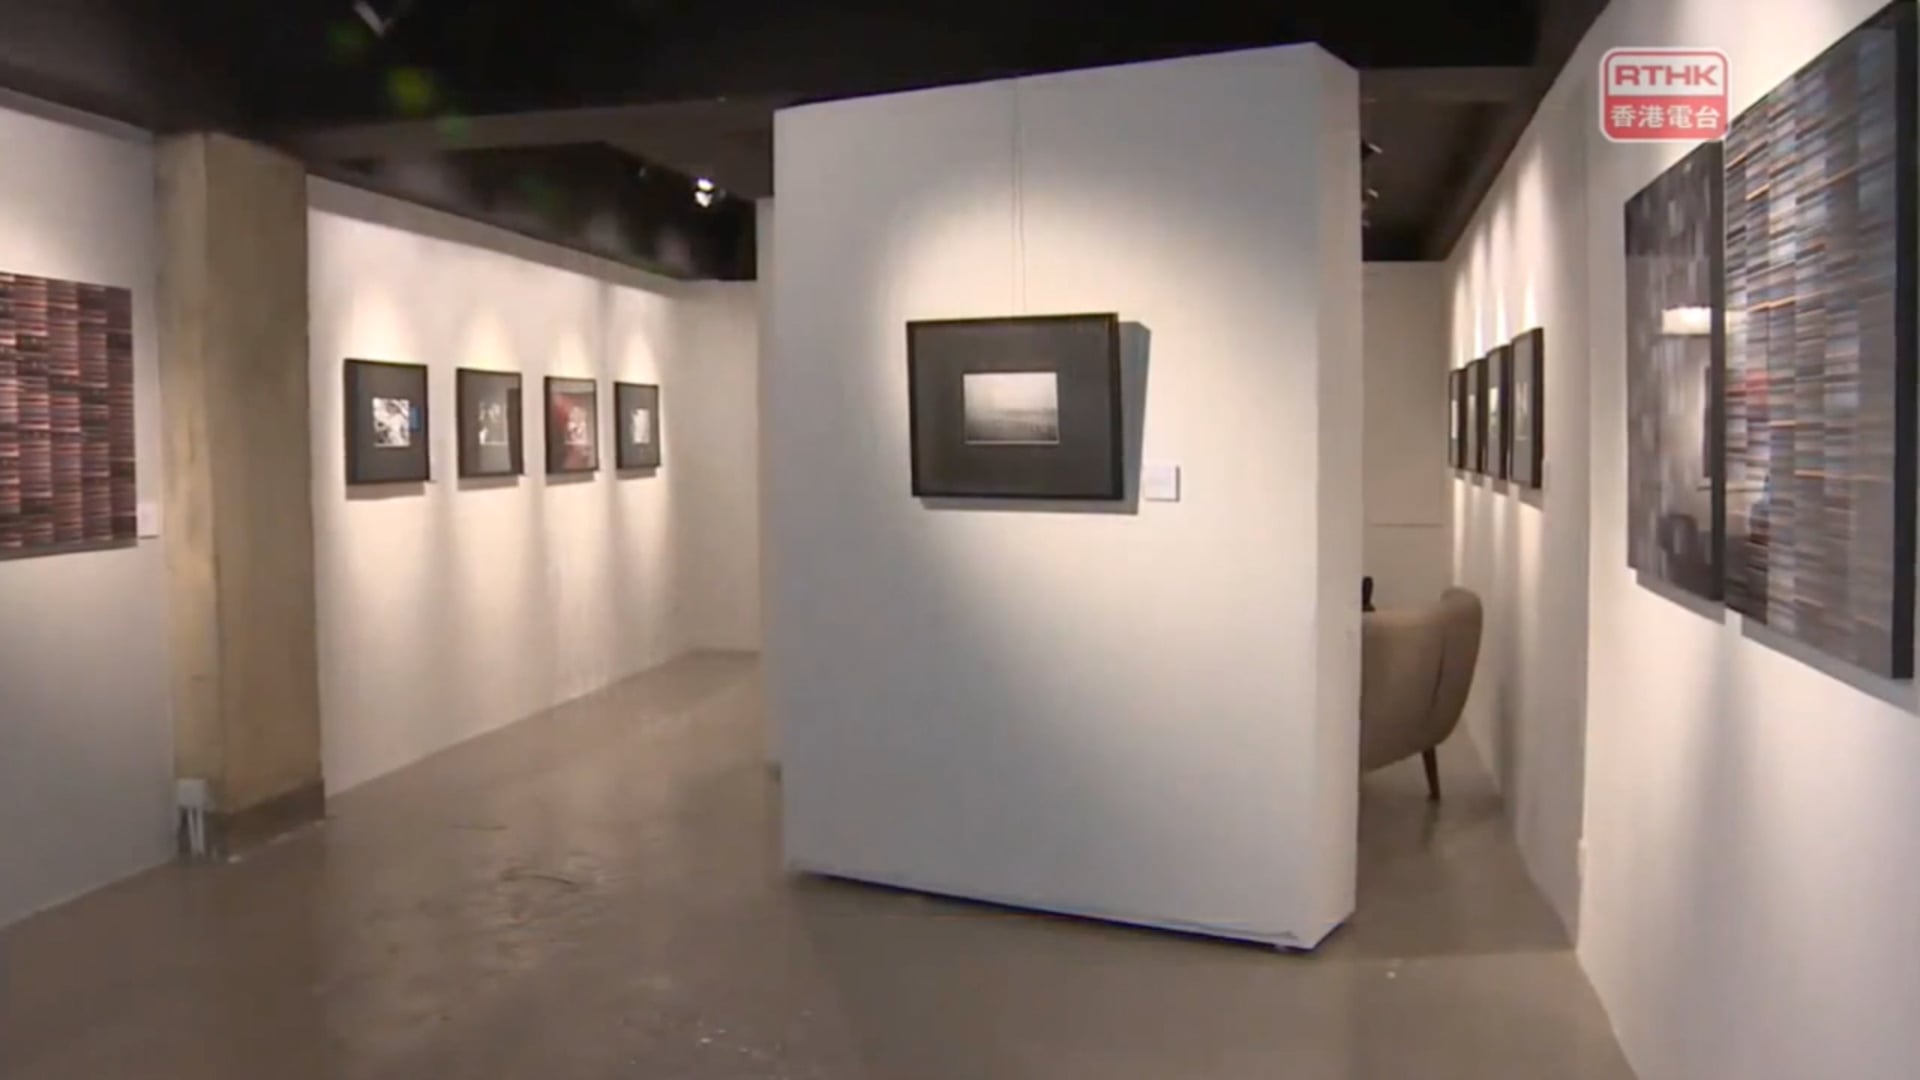 Jing Huang & Alexis Reynaud Photography Exhibition - The Works RTHK I La Galerie